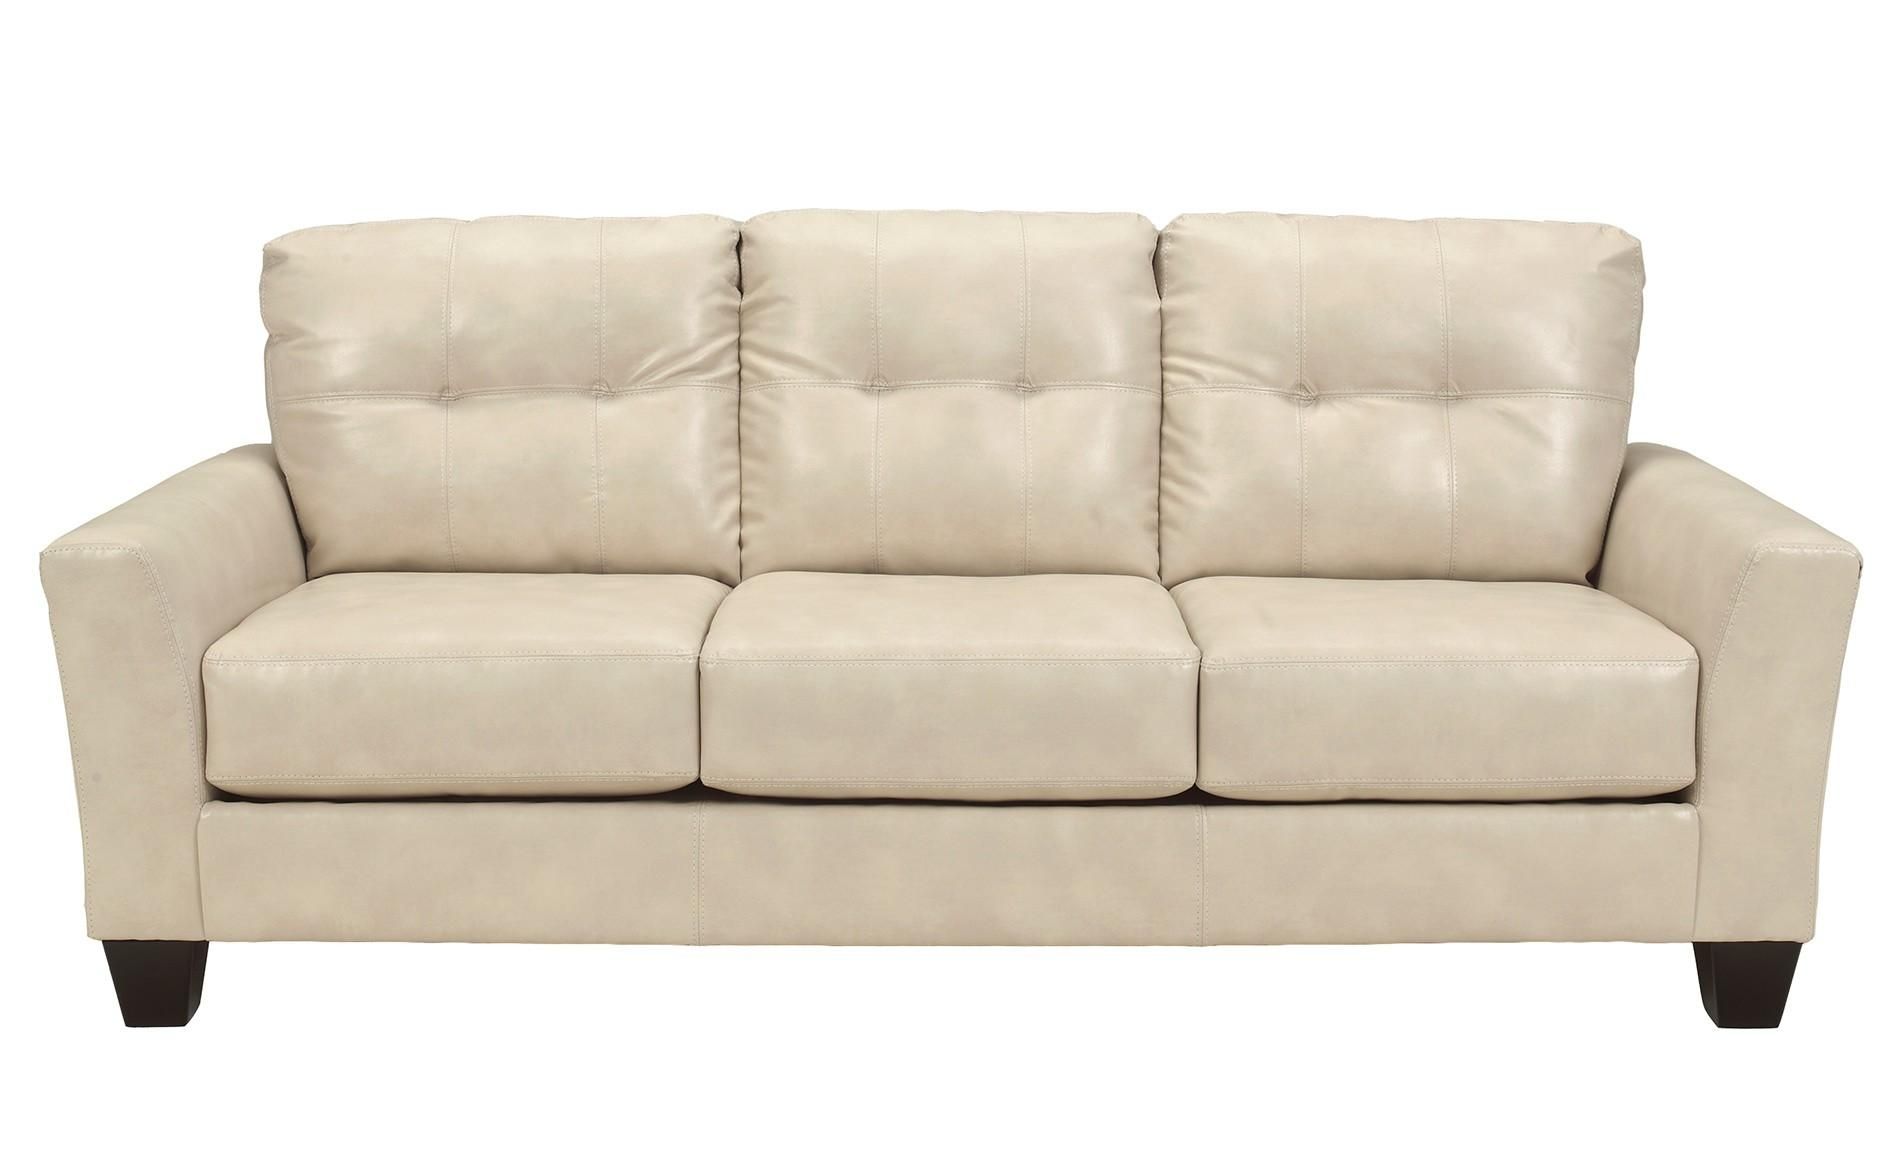 Decor: Fascinating Benchcraft Sofa With Luxury Shapes For Living Within Berkline Sofas (View 20 of 20)